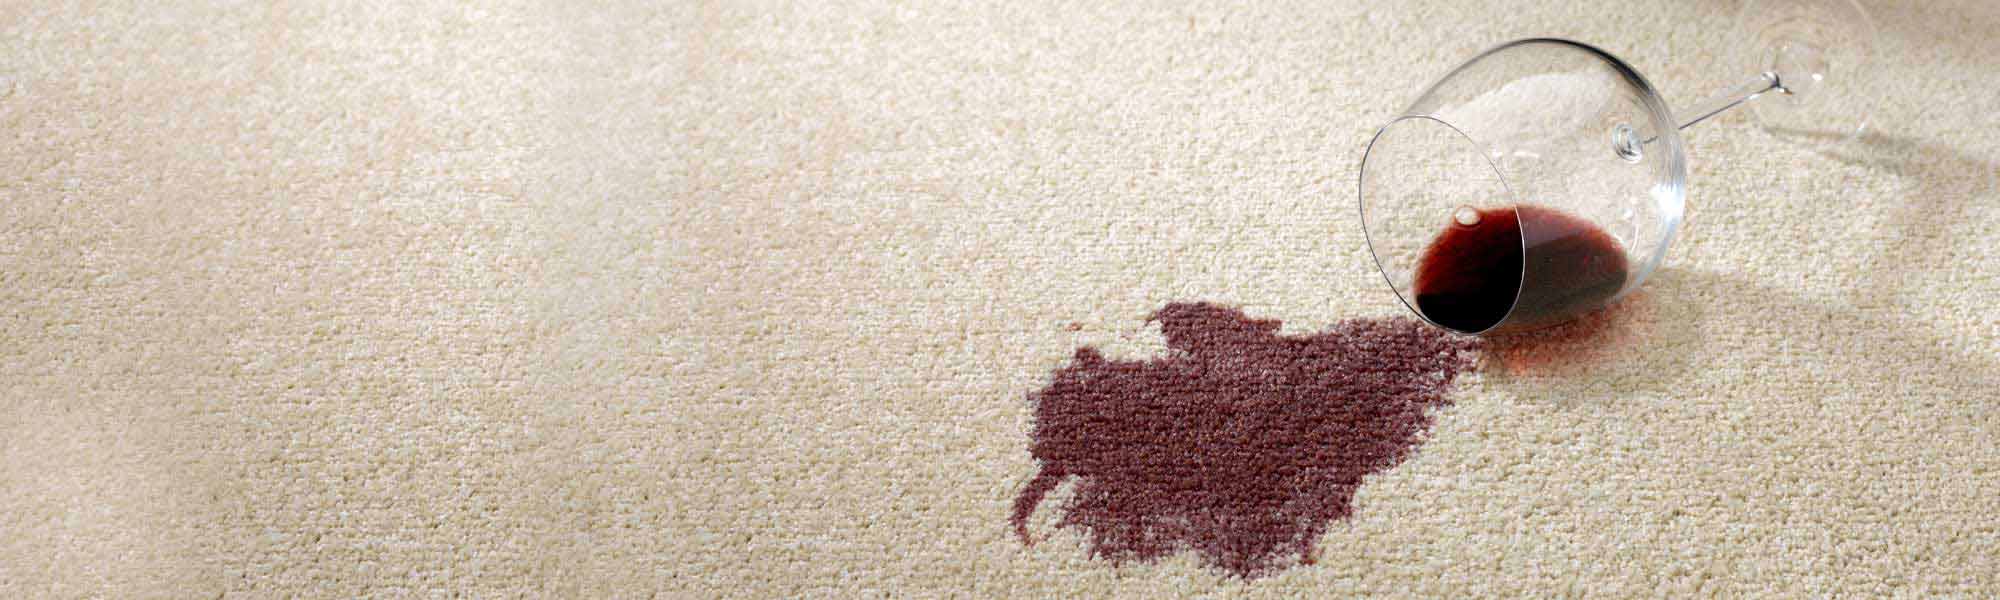 Professional Stain Removal Service in Thousand Oaks, Westlake Village, and Agoura Hills by Blue Ribbon Chem-Dry